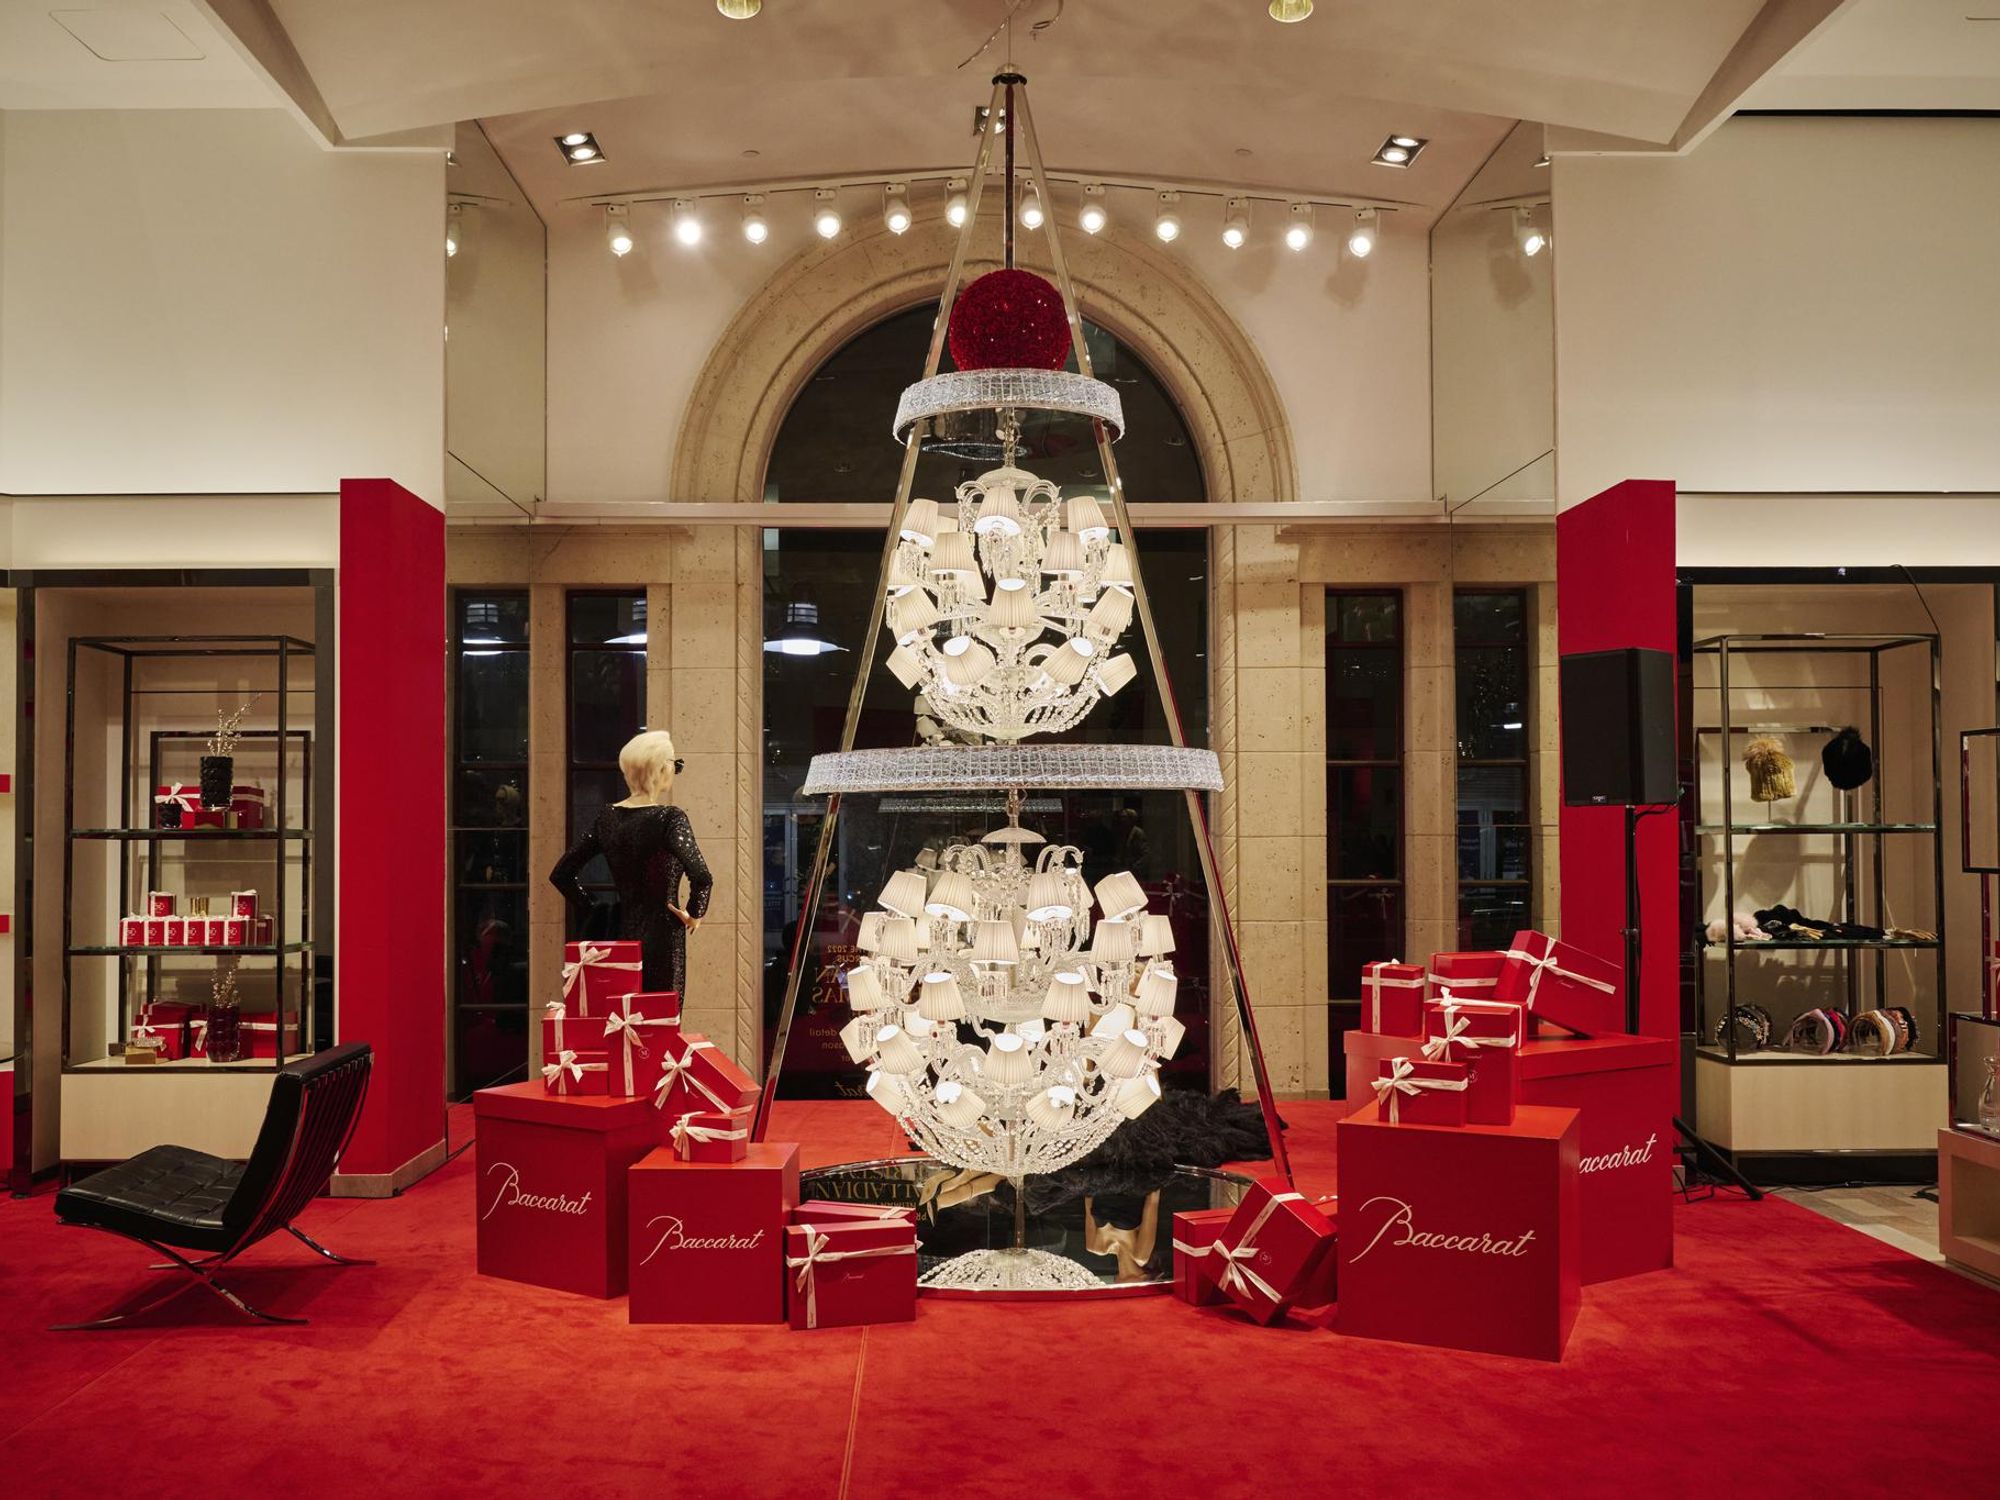 Neiman Marcus Downtown Dallas has just the tree for holiday blingy selfies  - CultureMap Dallas